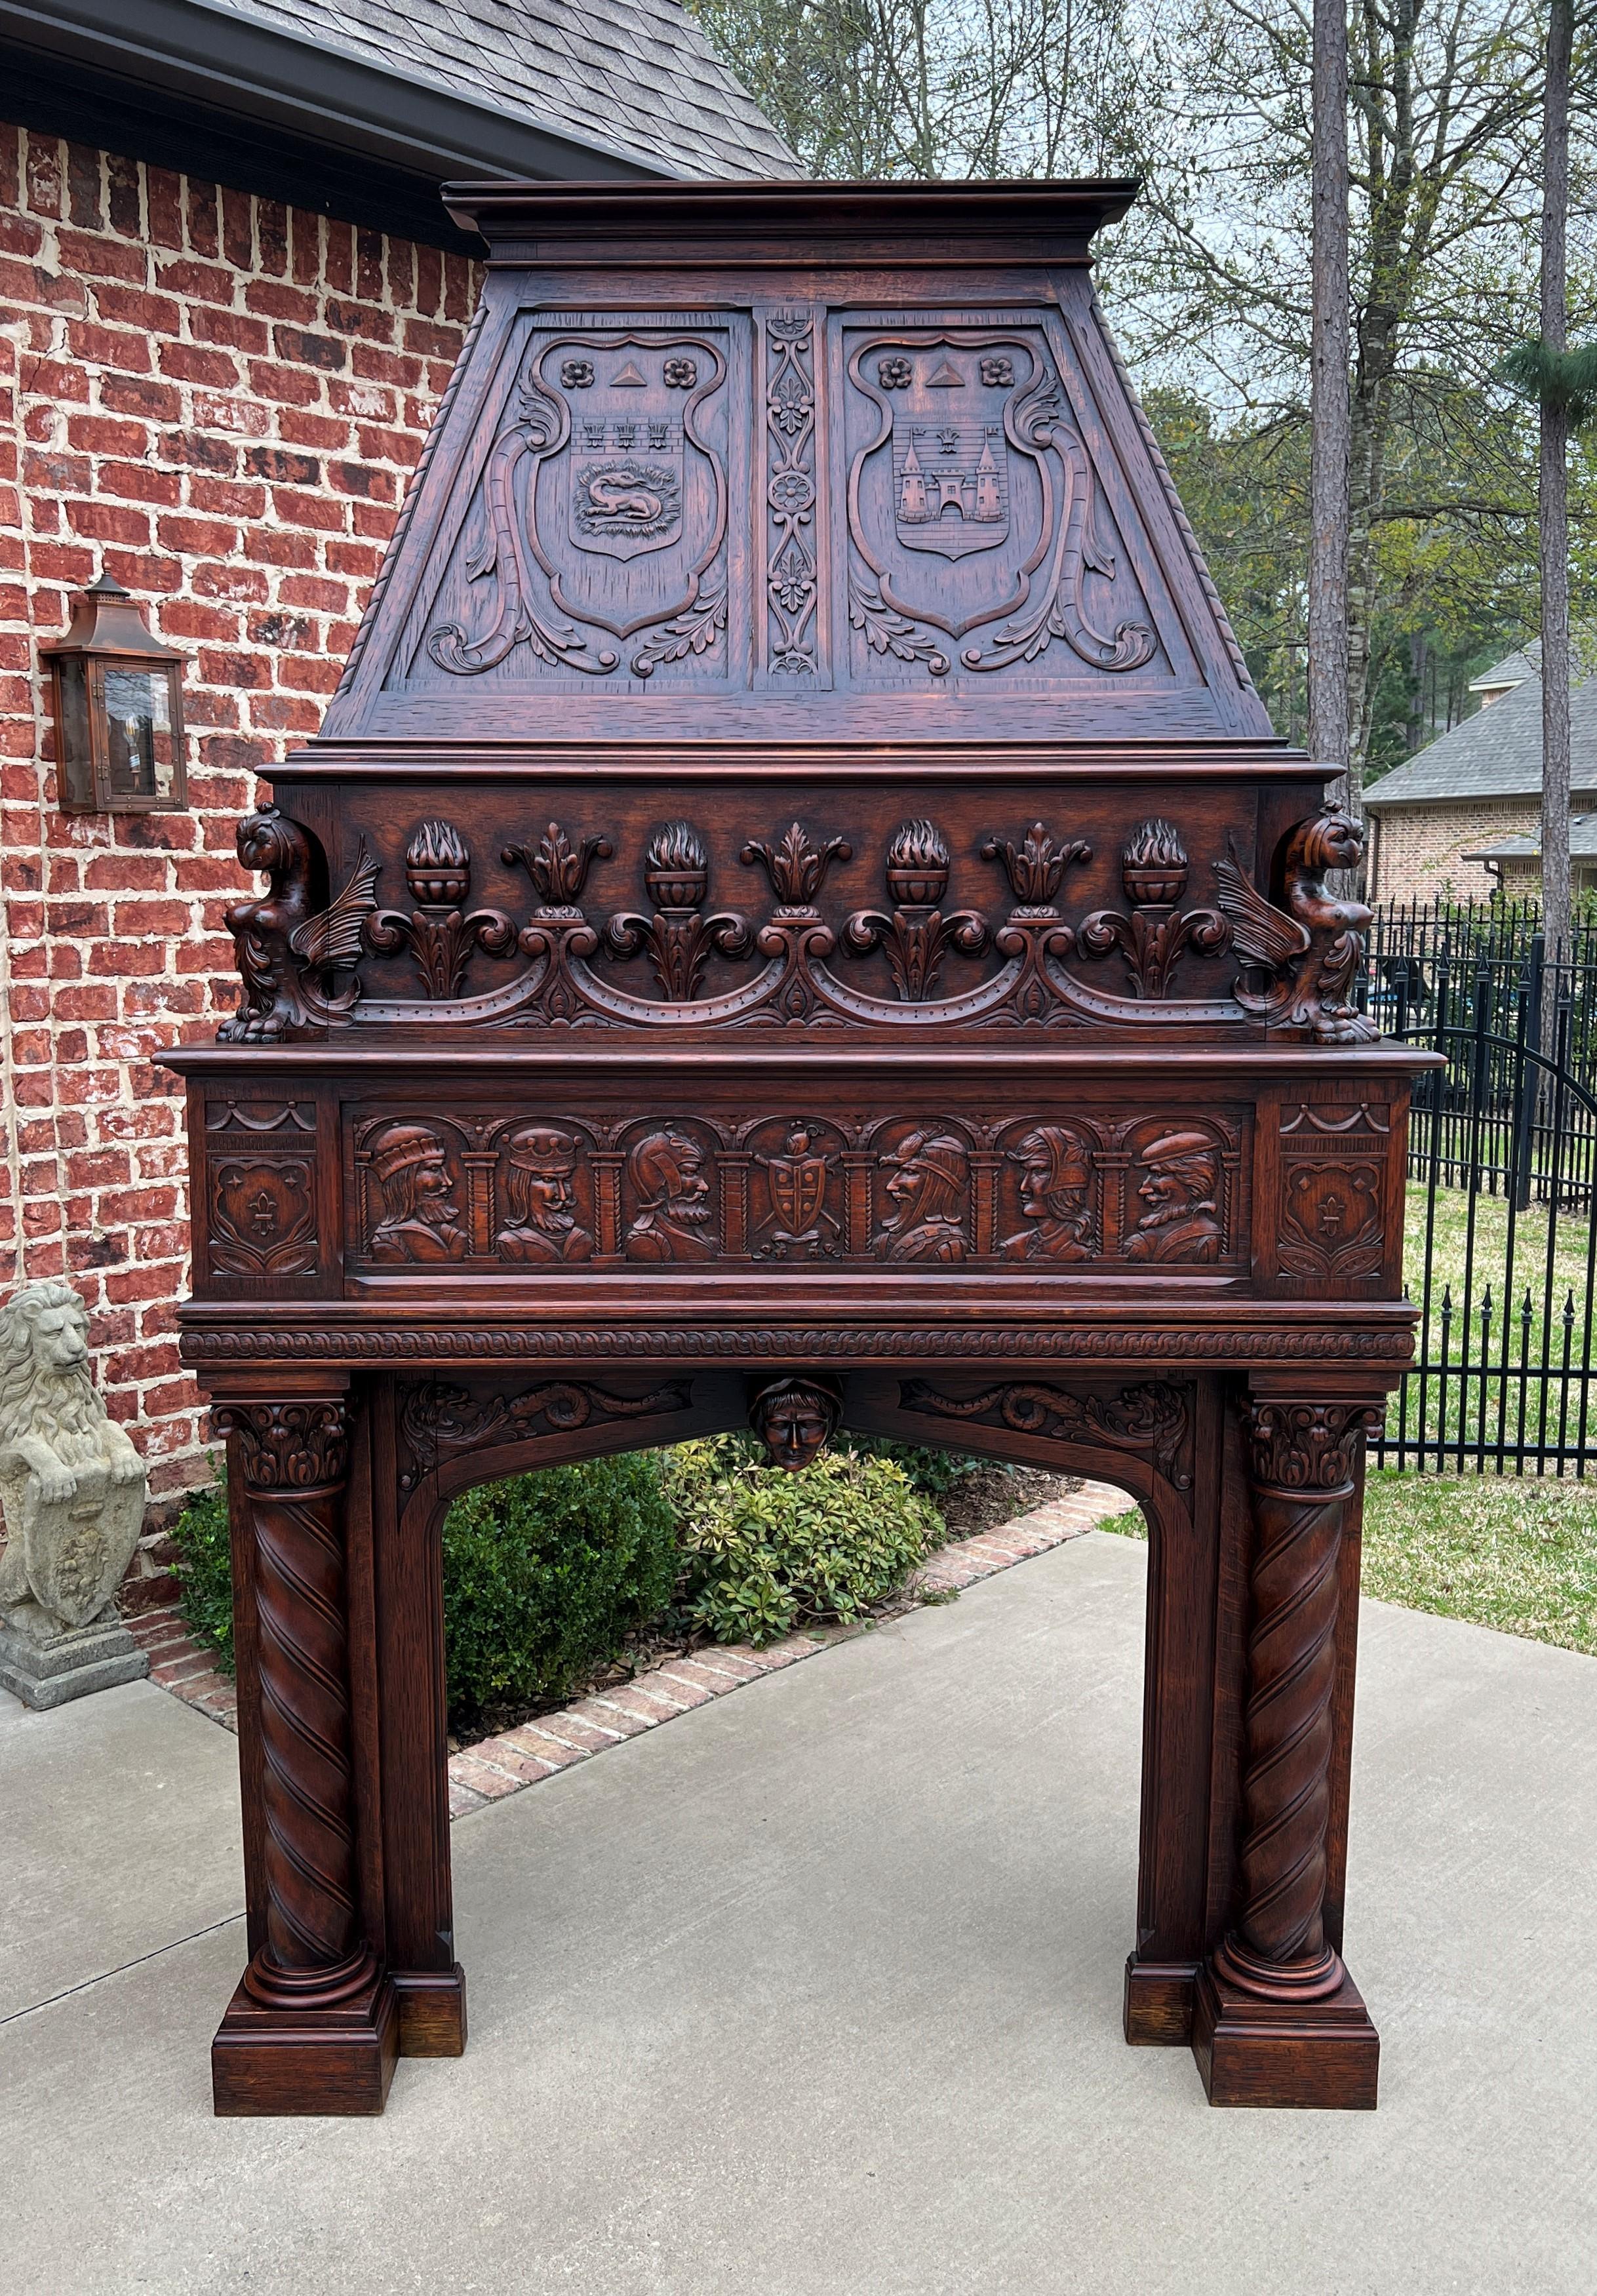 Superb antique large French fireplace mantel surround with upper hood ~~renaissance revival~~highly carved oak~~circa 1880s
This handsome statement piece will add charm and character to your home or castle~~the best of the best~~masterfully carved